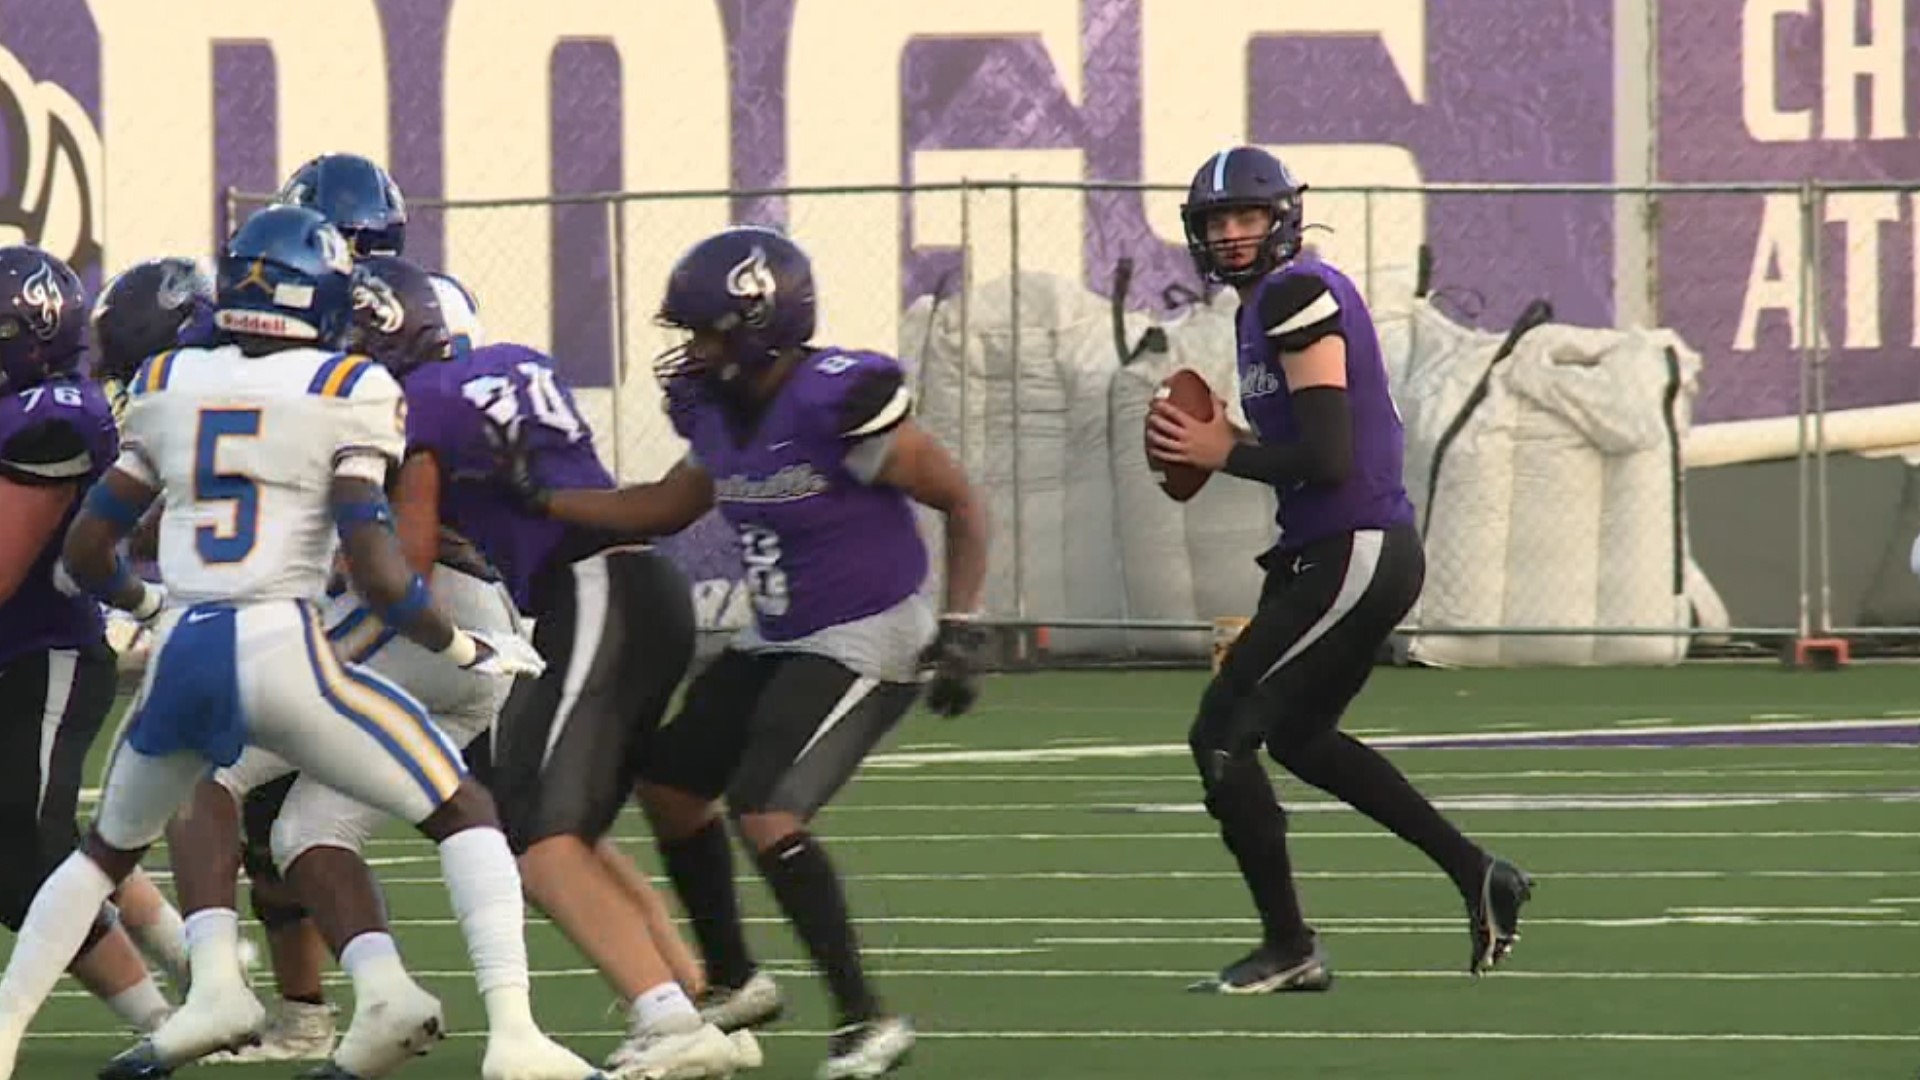 After an injury early in his career, Lindsey is now making the most of his opportunity as the Purple Dogs' starting quarterback and leading a high-flying offense.